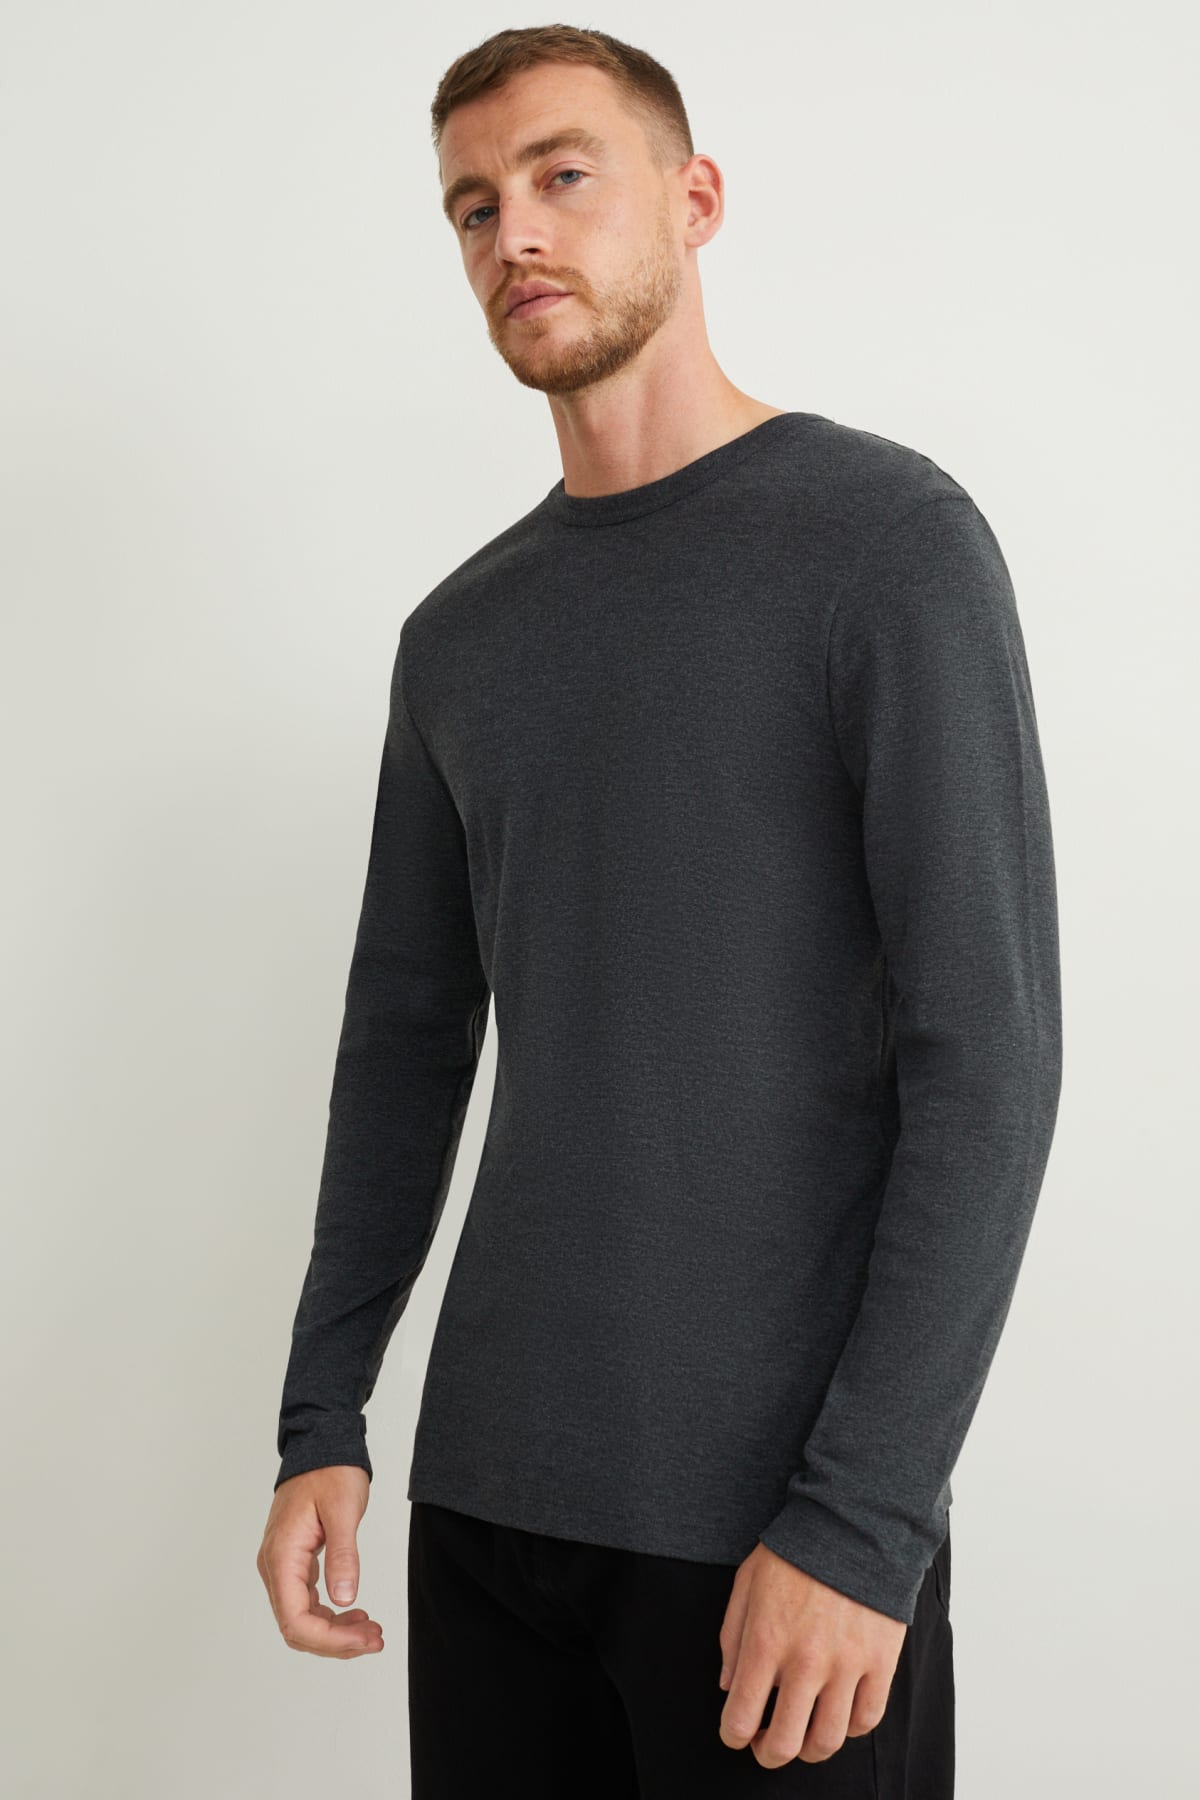 Find your perfect Long-sleeved t-shirts here